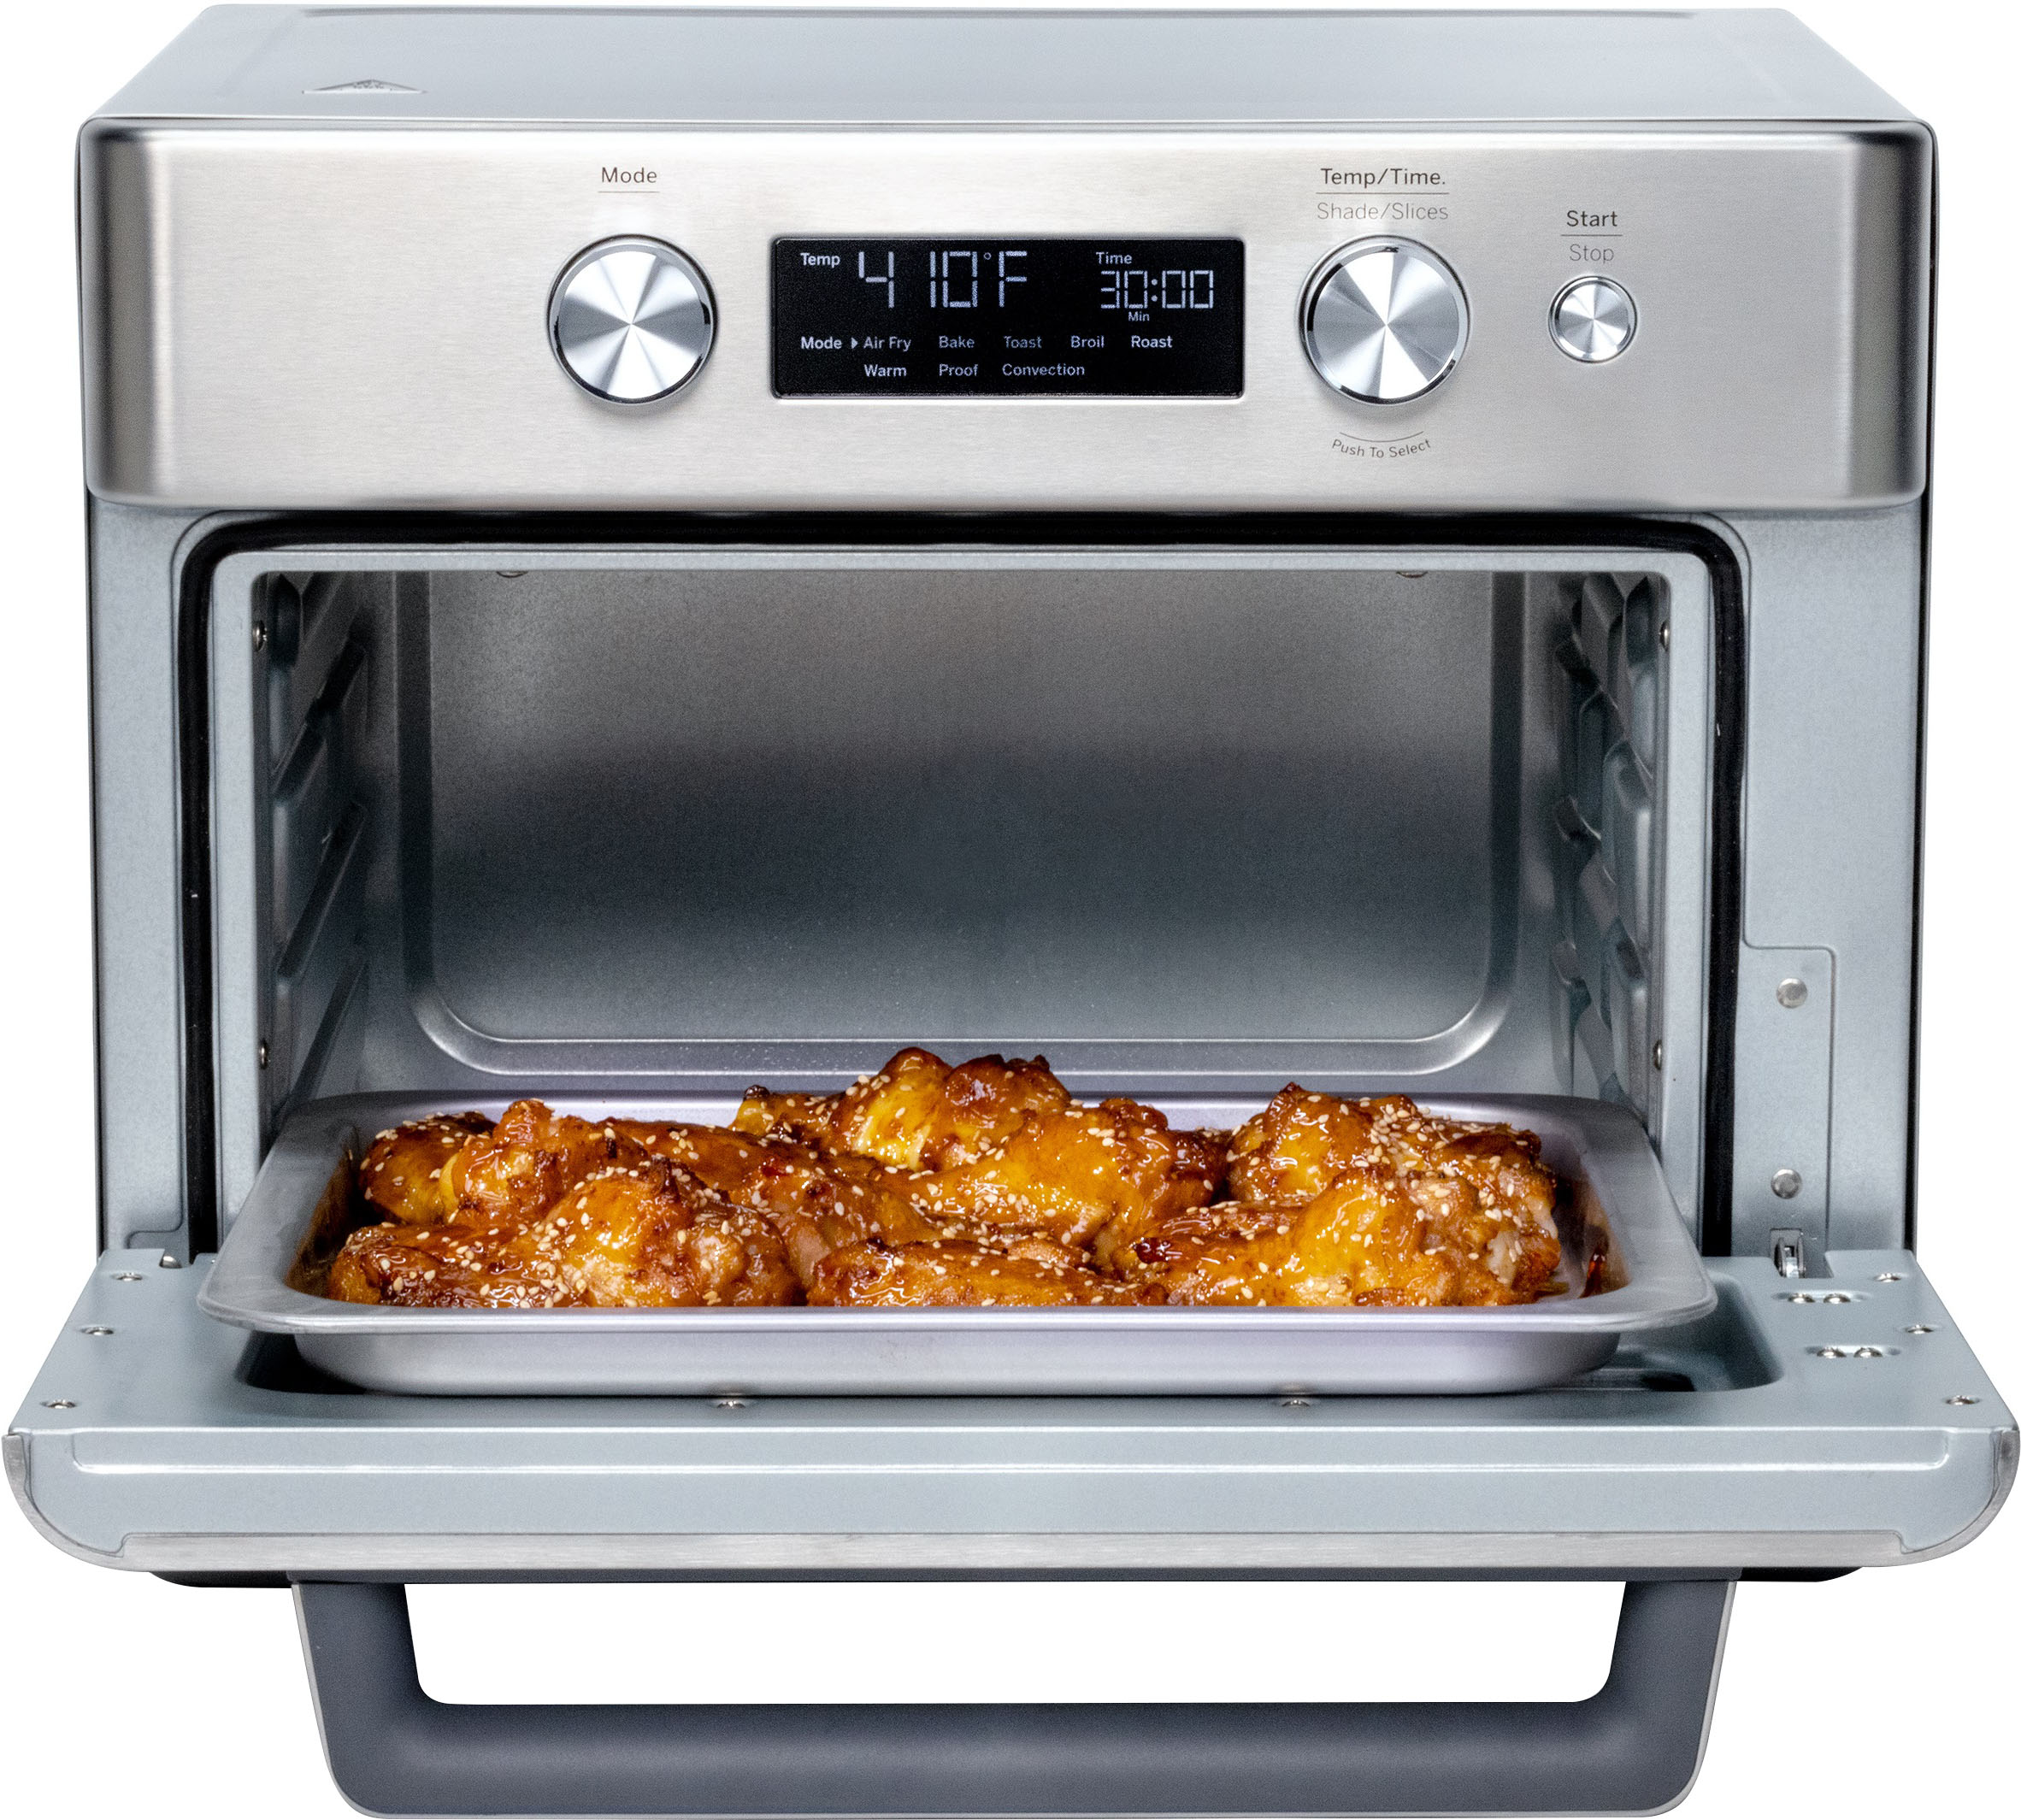 Brand New Farberware Air Fryer Toaster Oven Stainless Steel